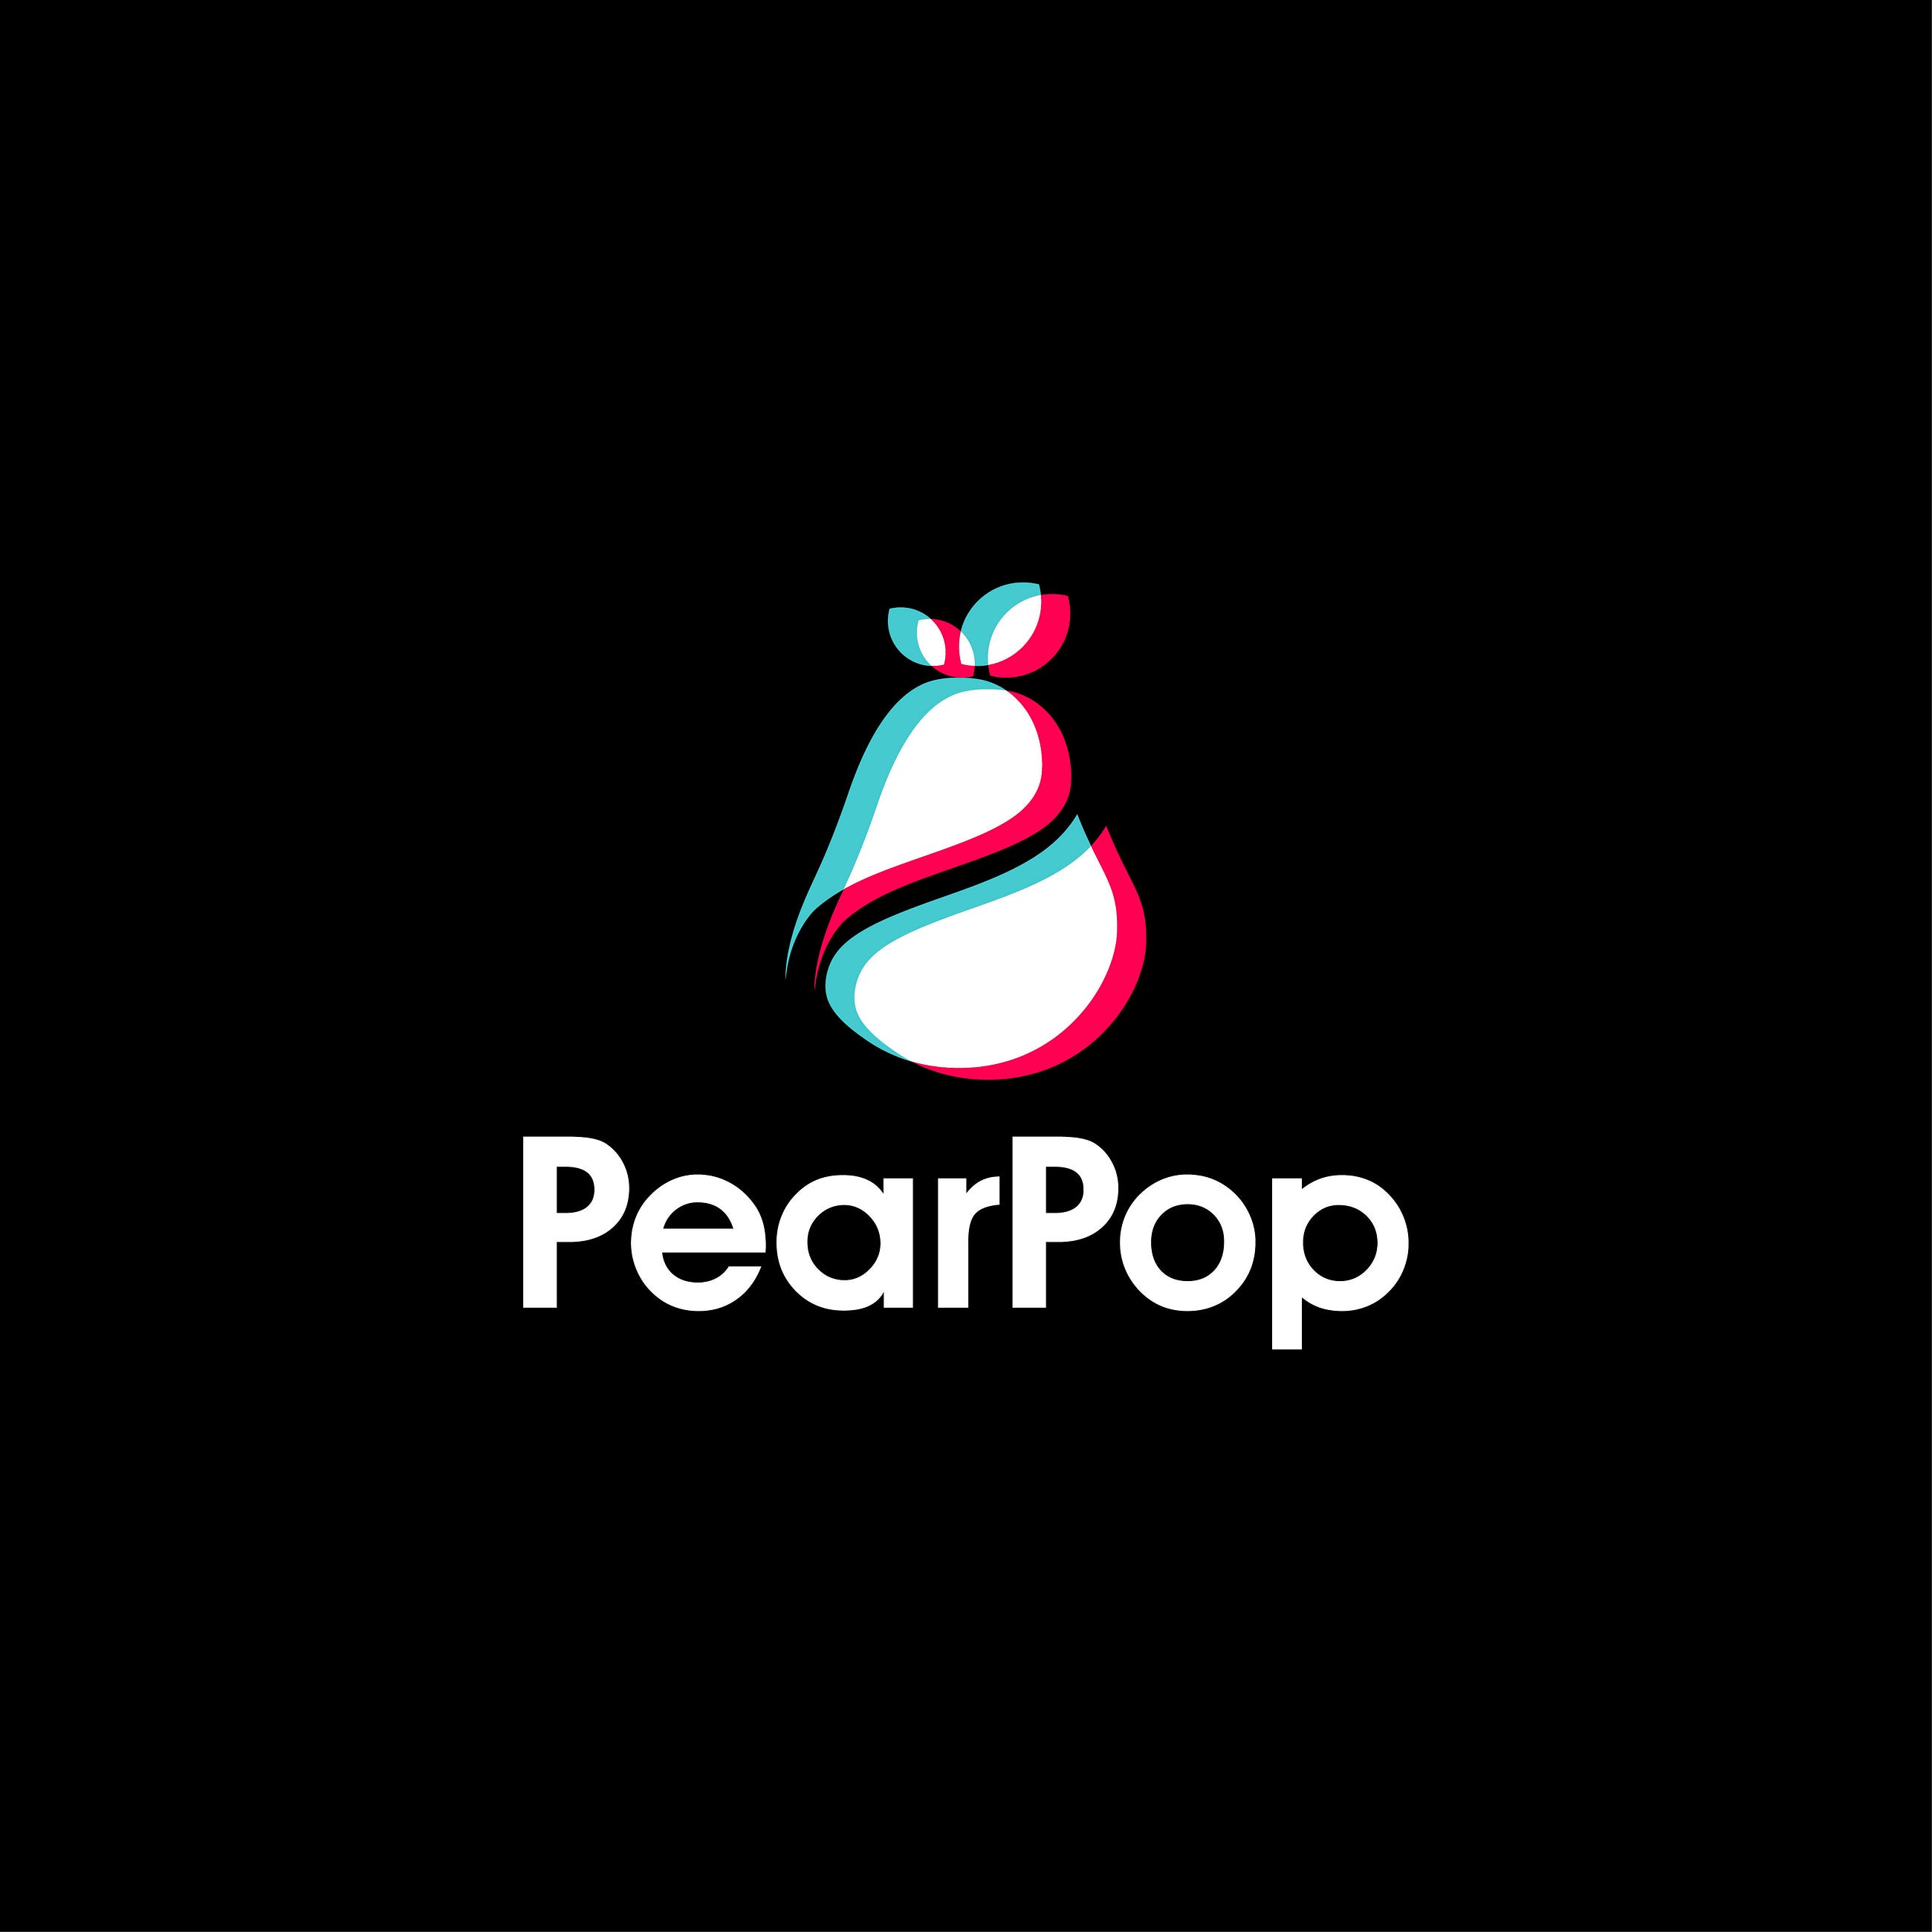 In a World Where Internet “Clout” is Currency, PearPop Makes TikTok Fame Accessible.